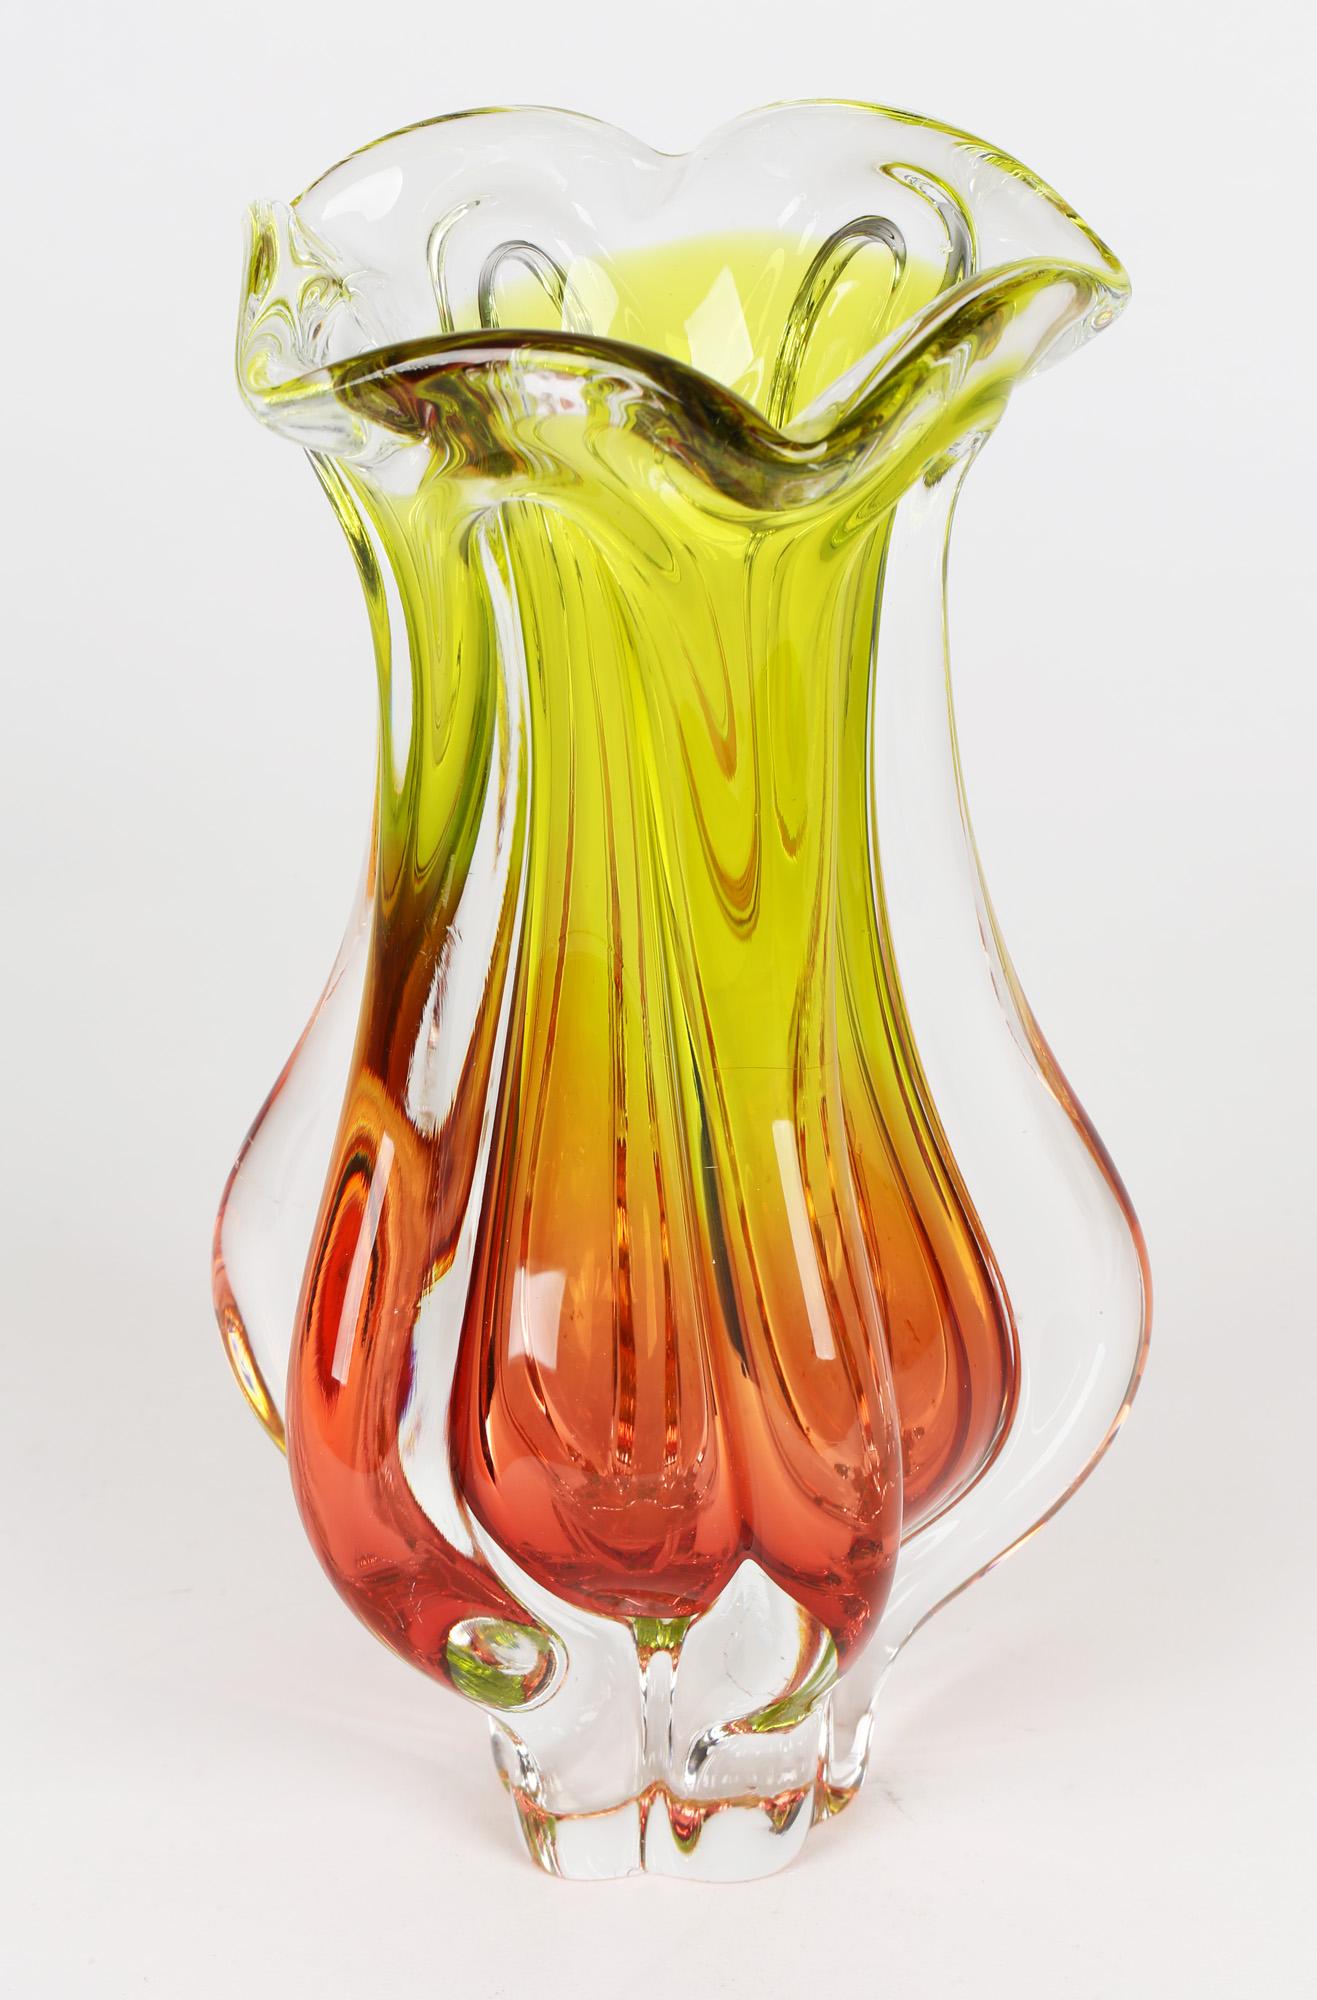 A stunning Czech Chribska art glass vase in yellow and red cased glass by Josef Hospodka and dating from around 1960. The heavily blown glass vase stands on a narrow shaped foot which has been ground flat and has five protruding handle like wings